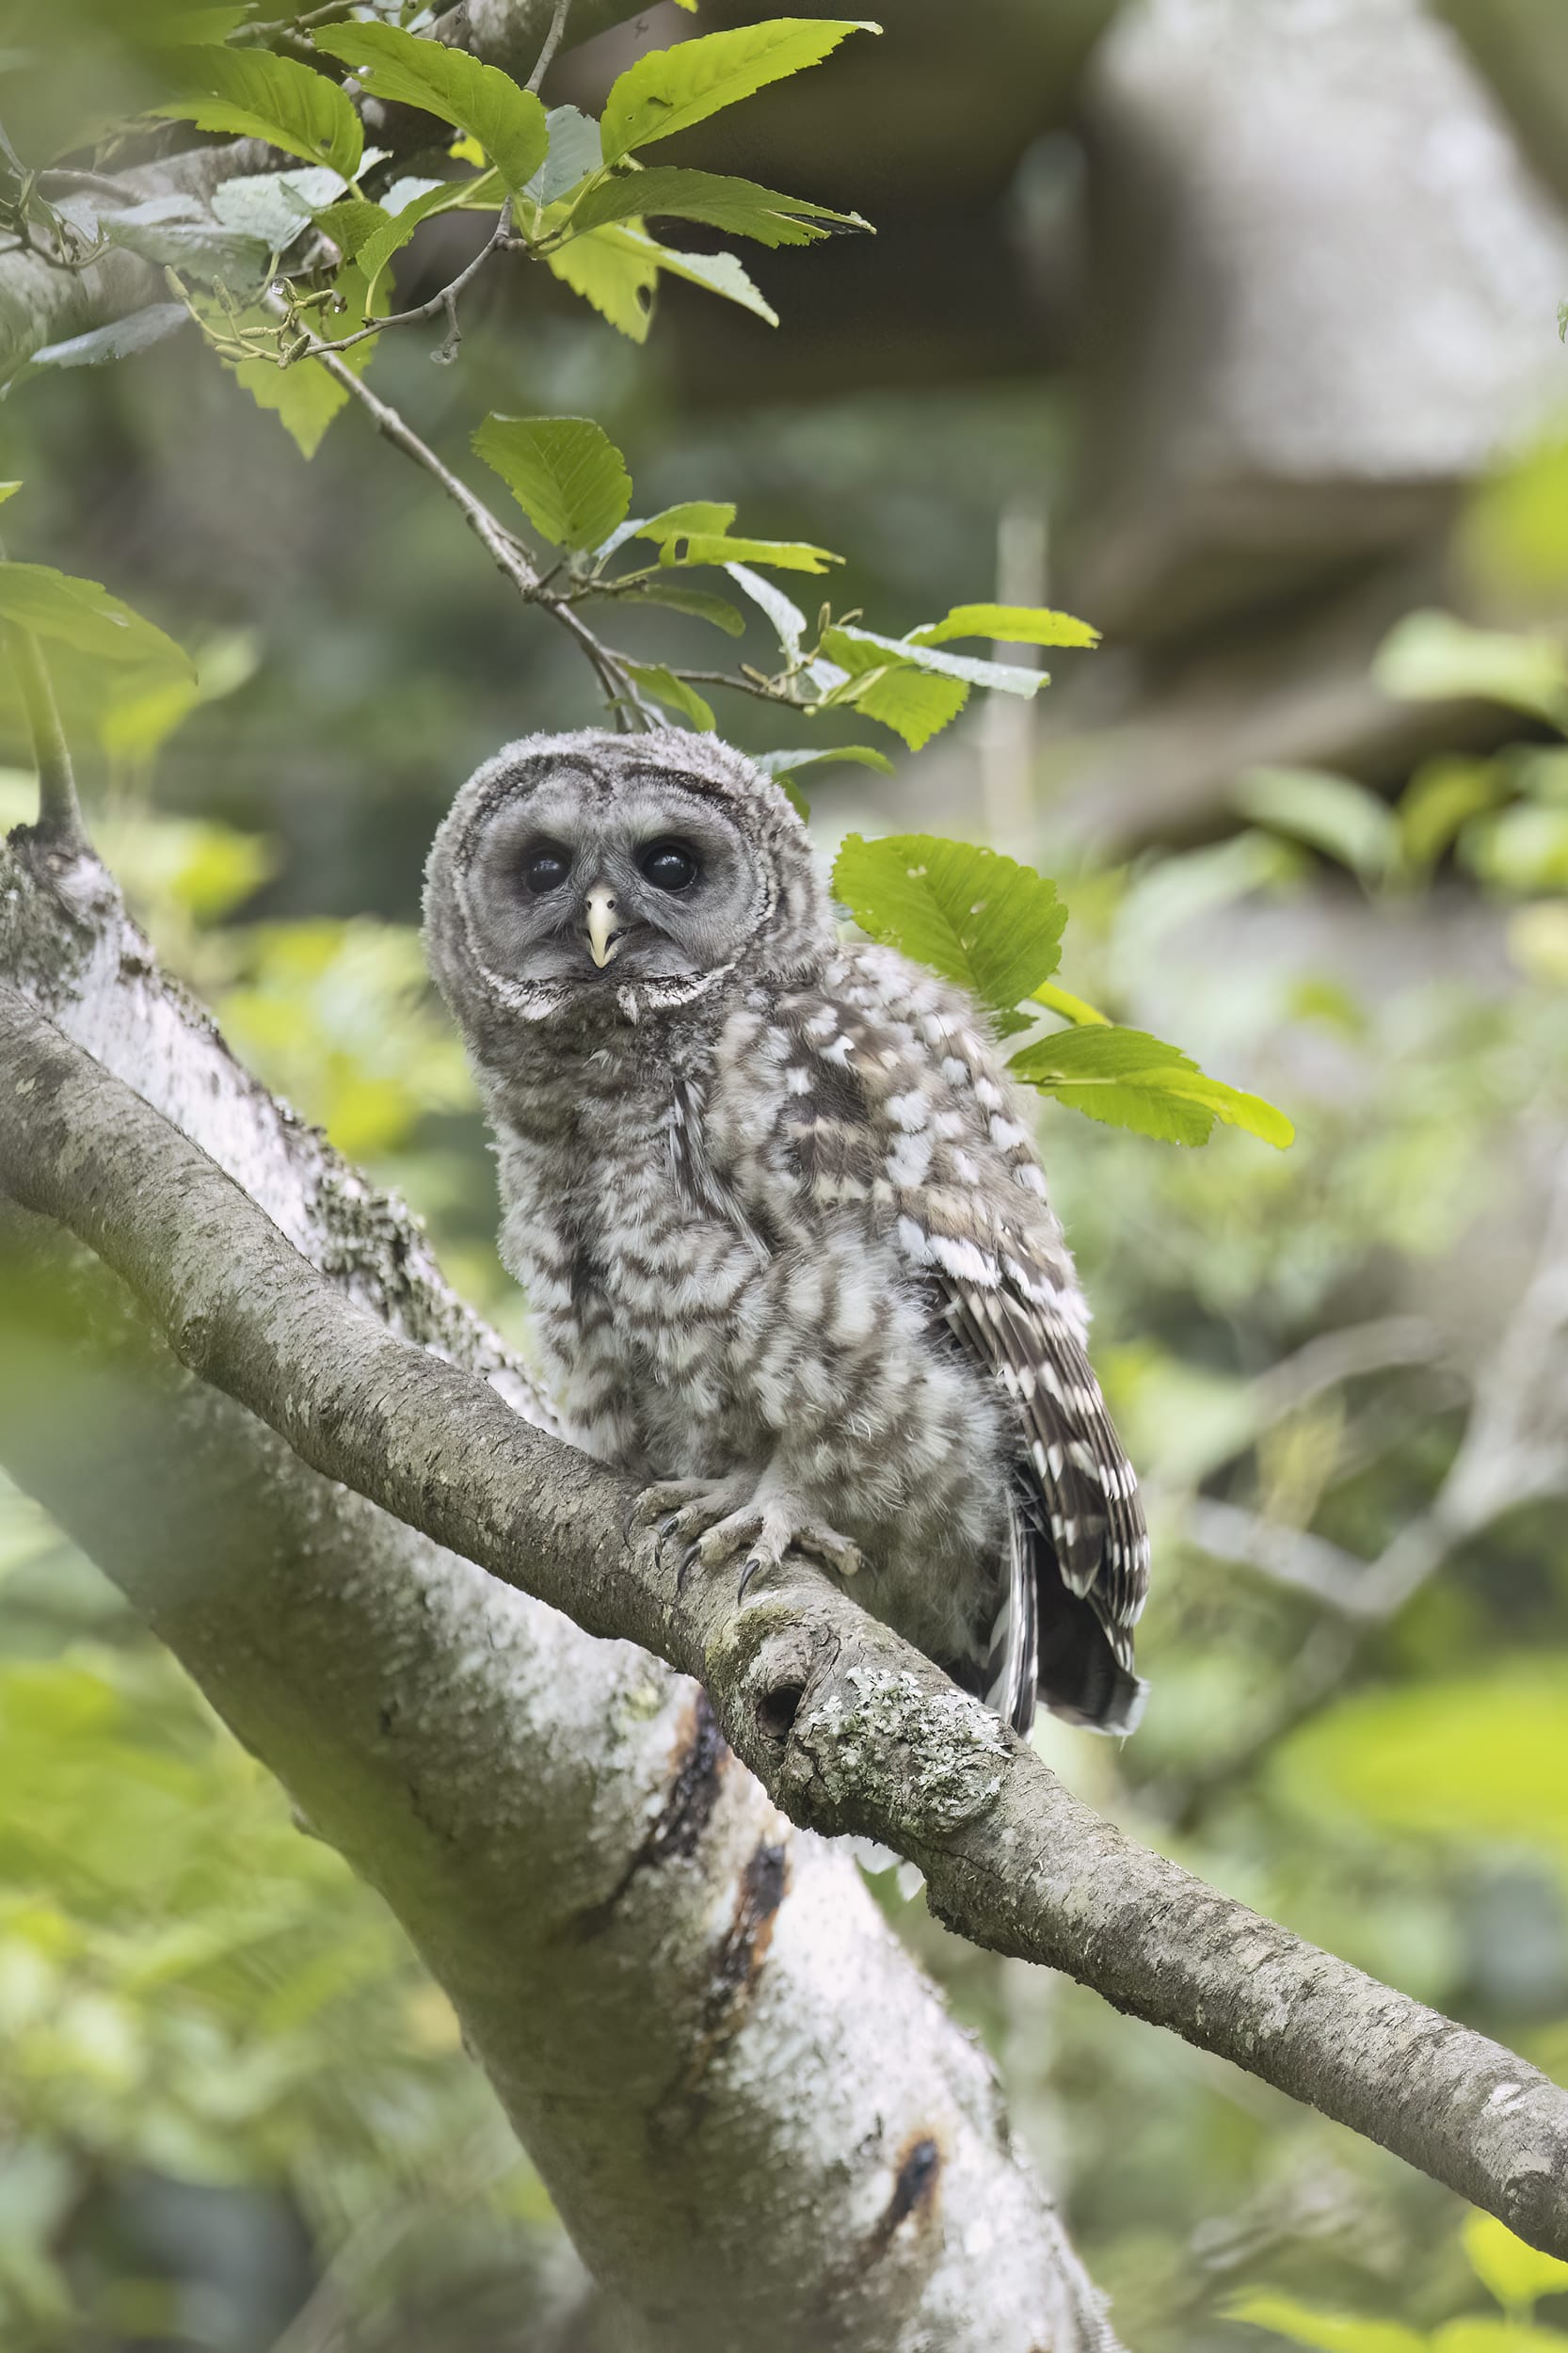 Barred Owlet